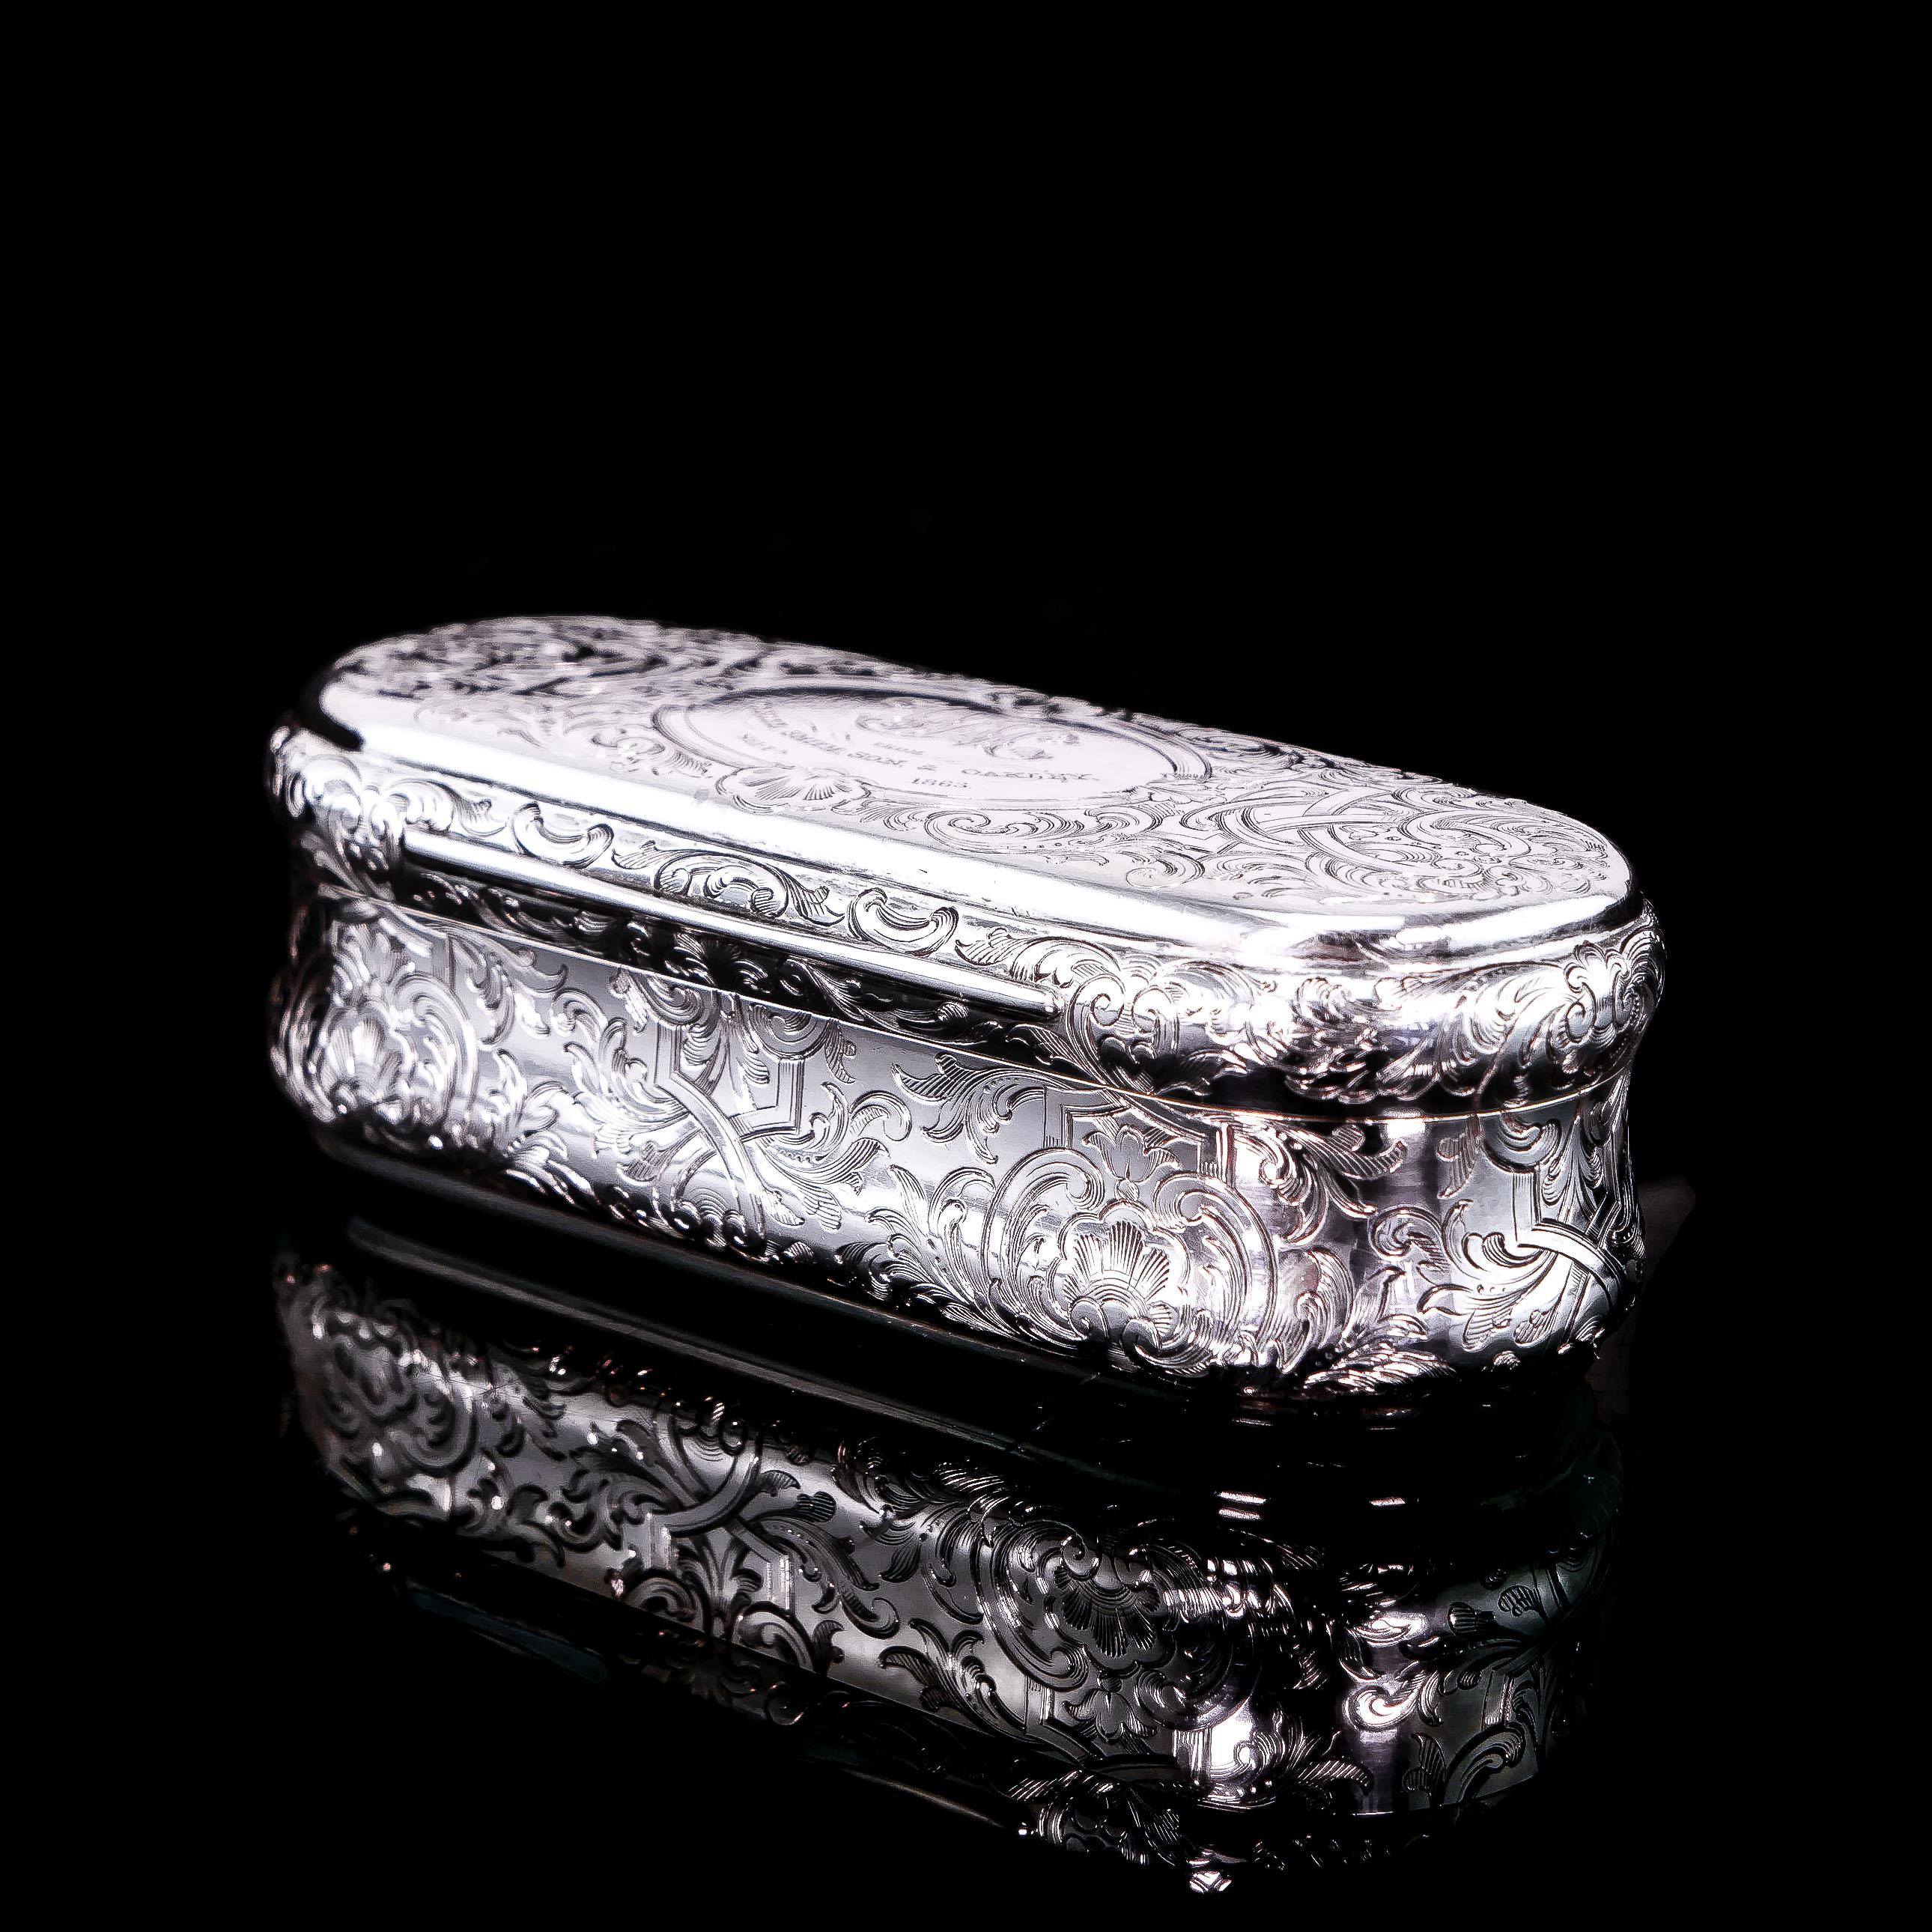 Antique Silver Snuff Box Oblong Shape - Charles Rawlings & William Summers 1849 For Sale 2